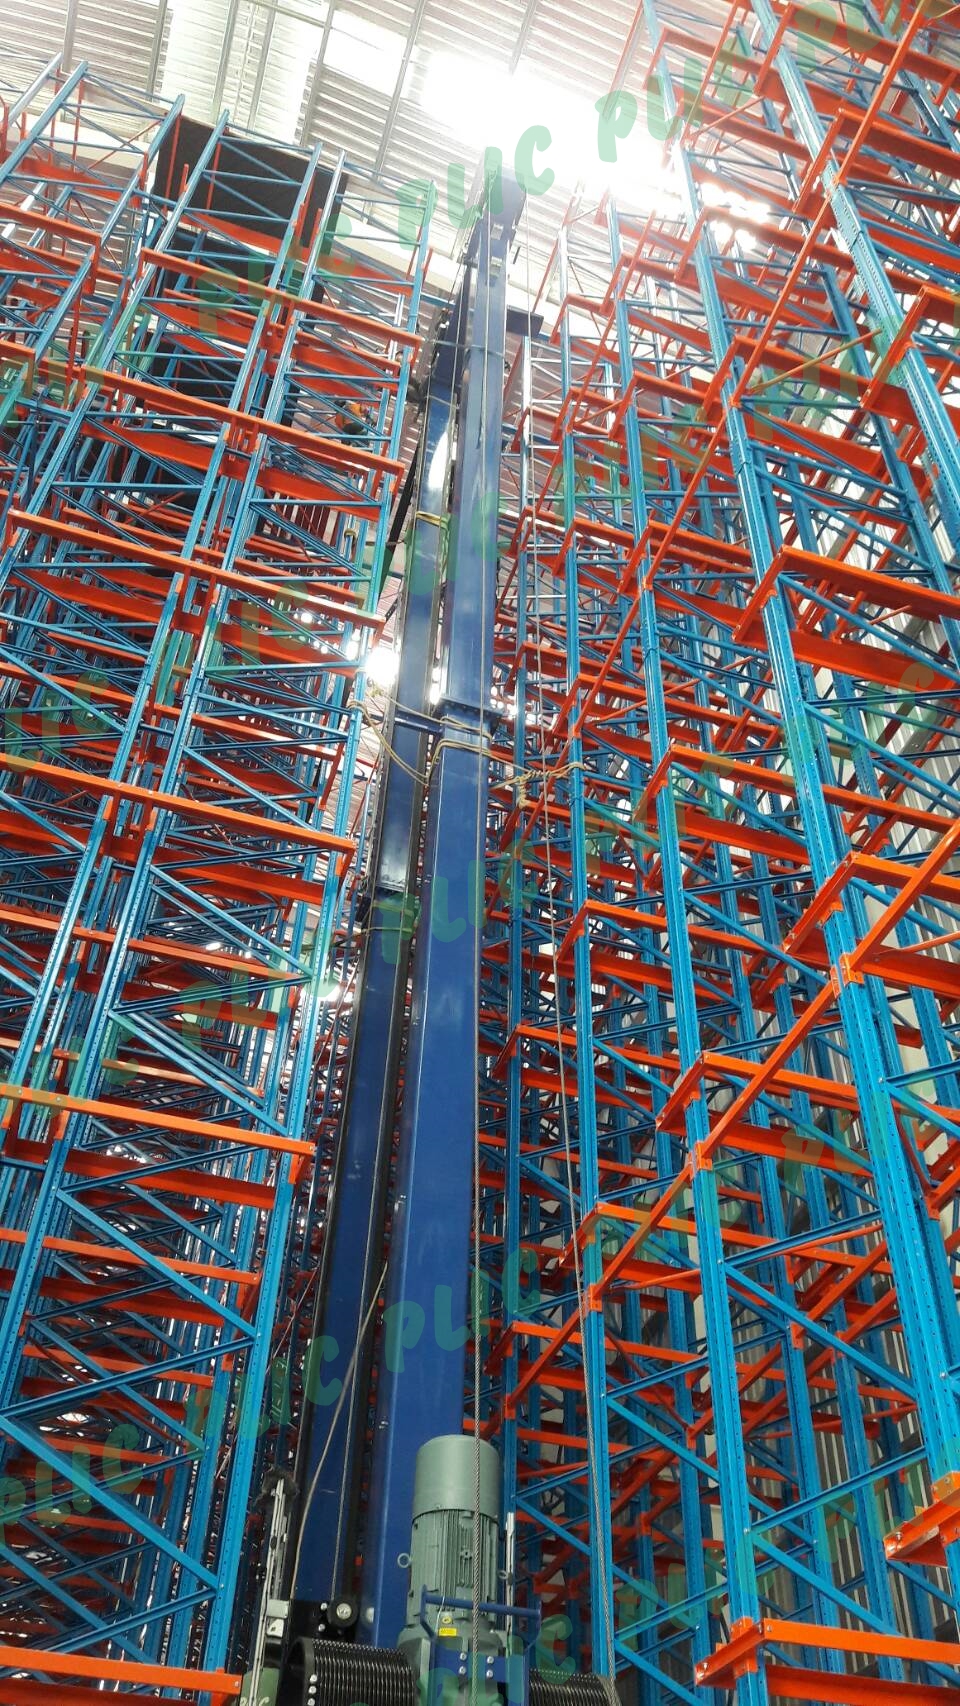 Automated storage and retrieval system (AS/RS)